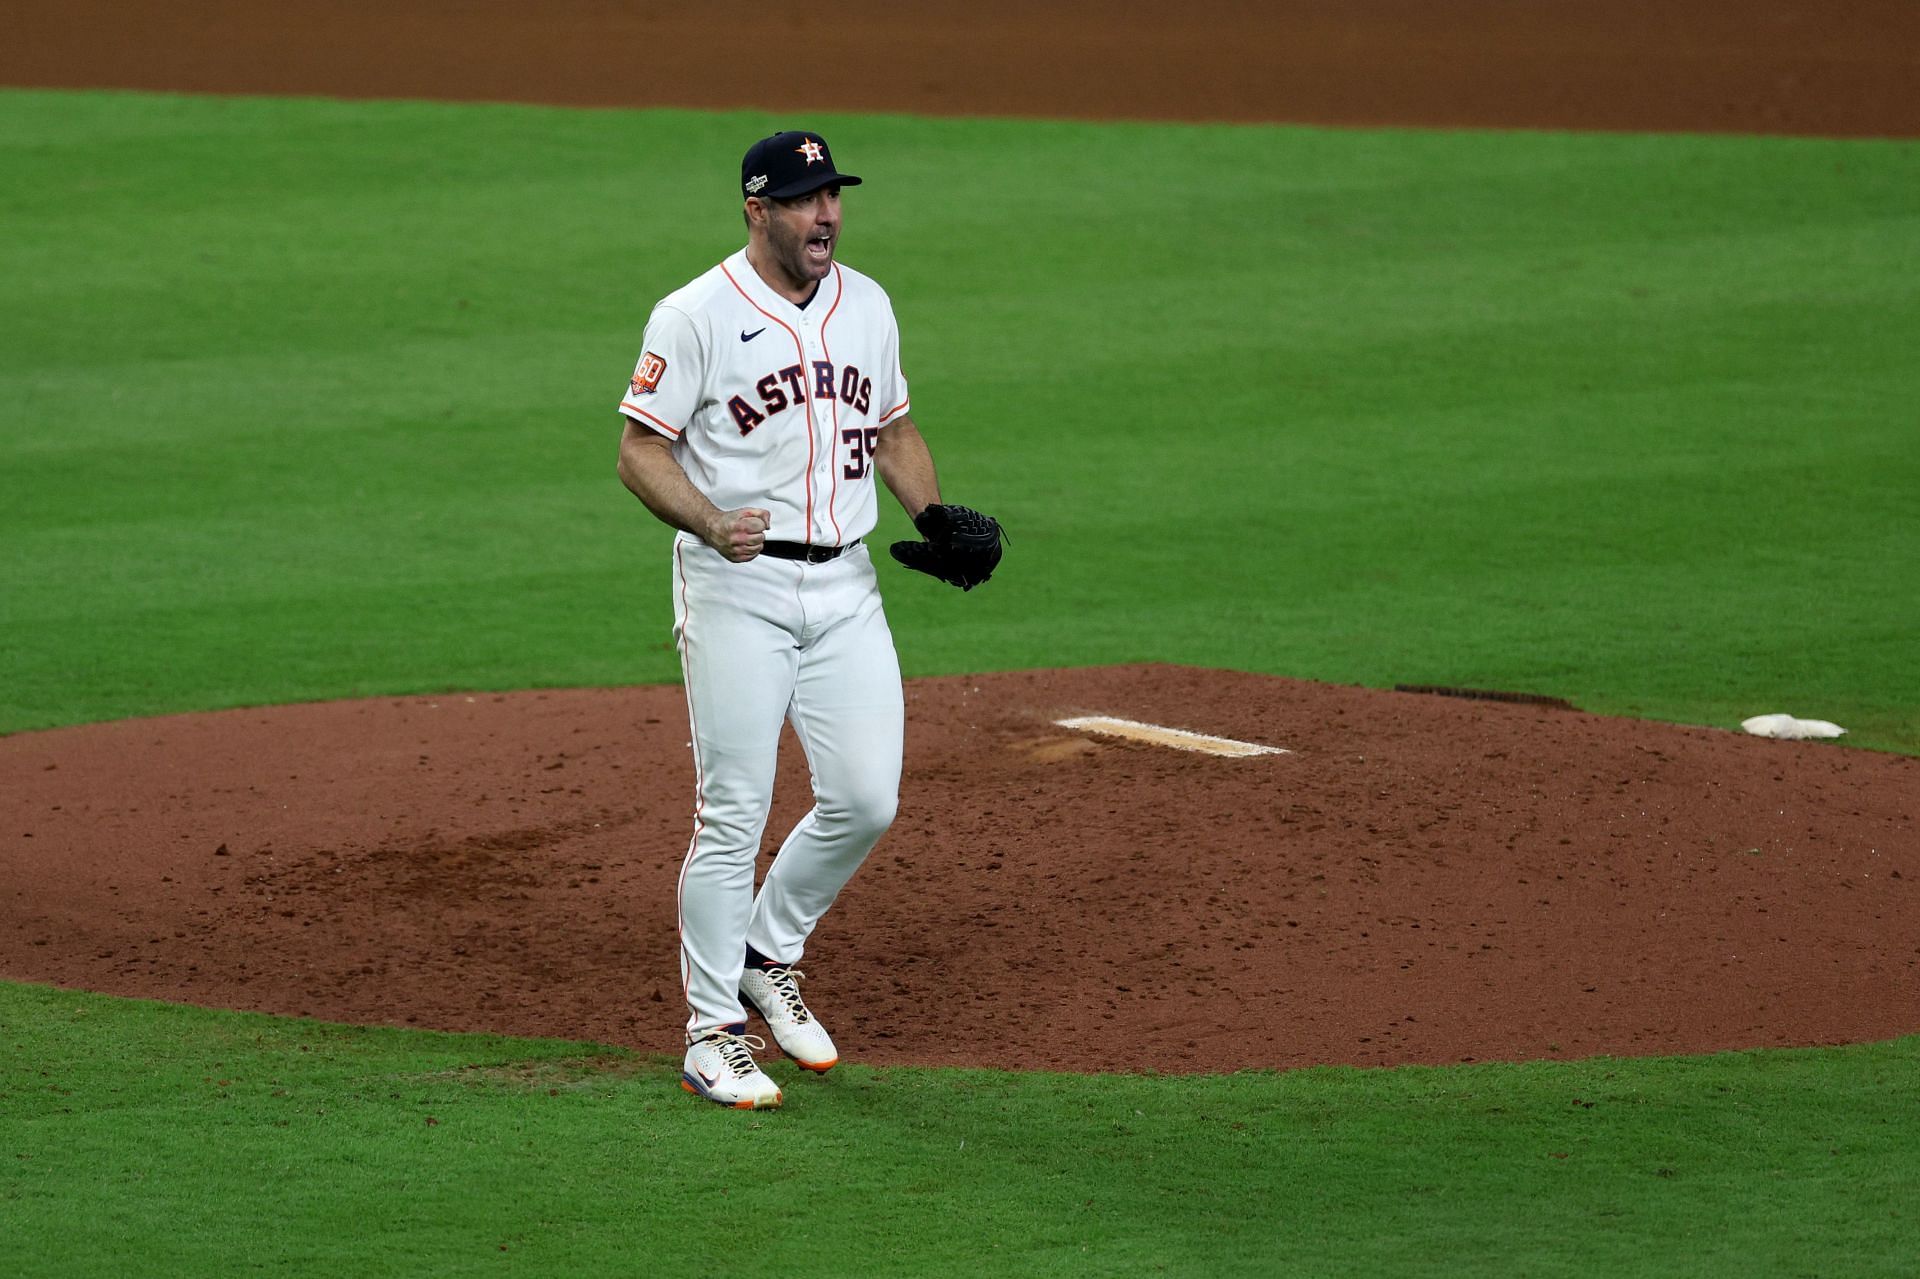 Verlander: 'I want to play until they rip the jersey off me